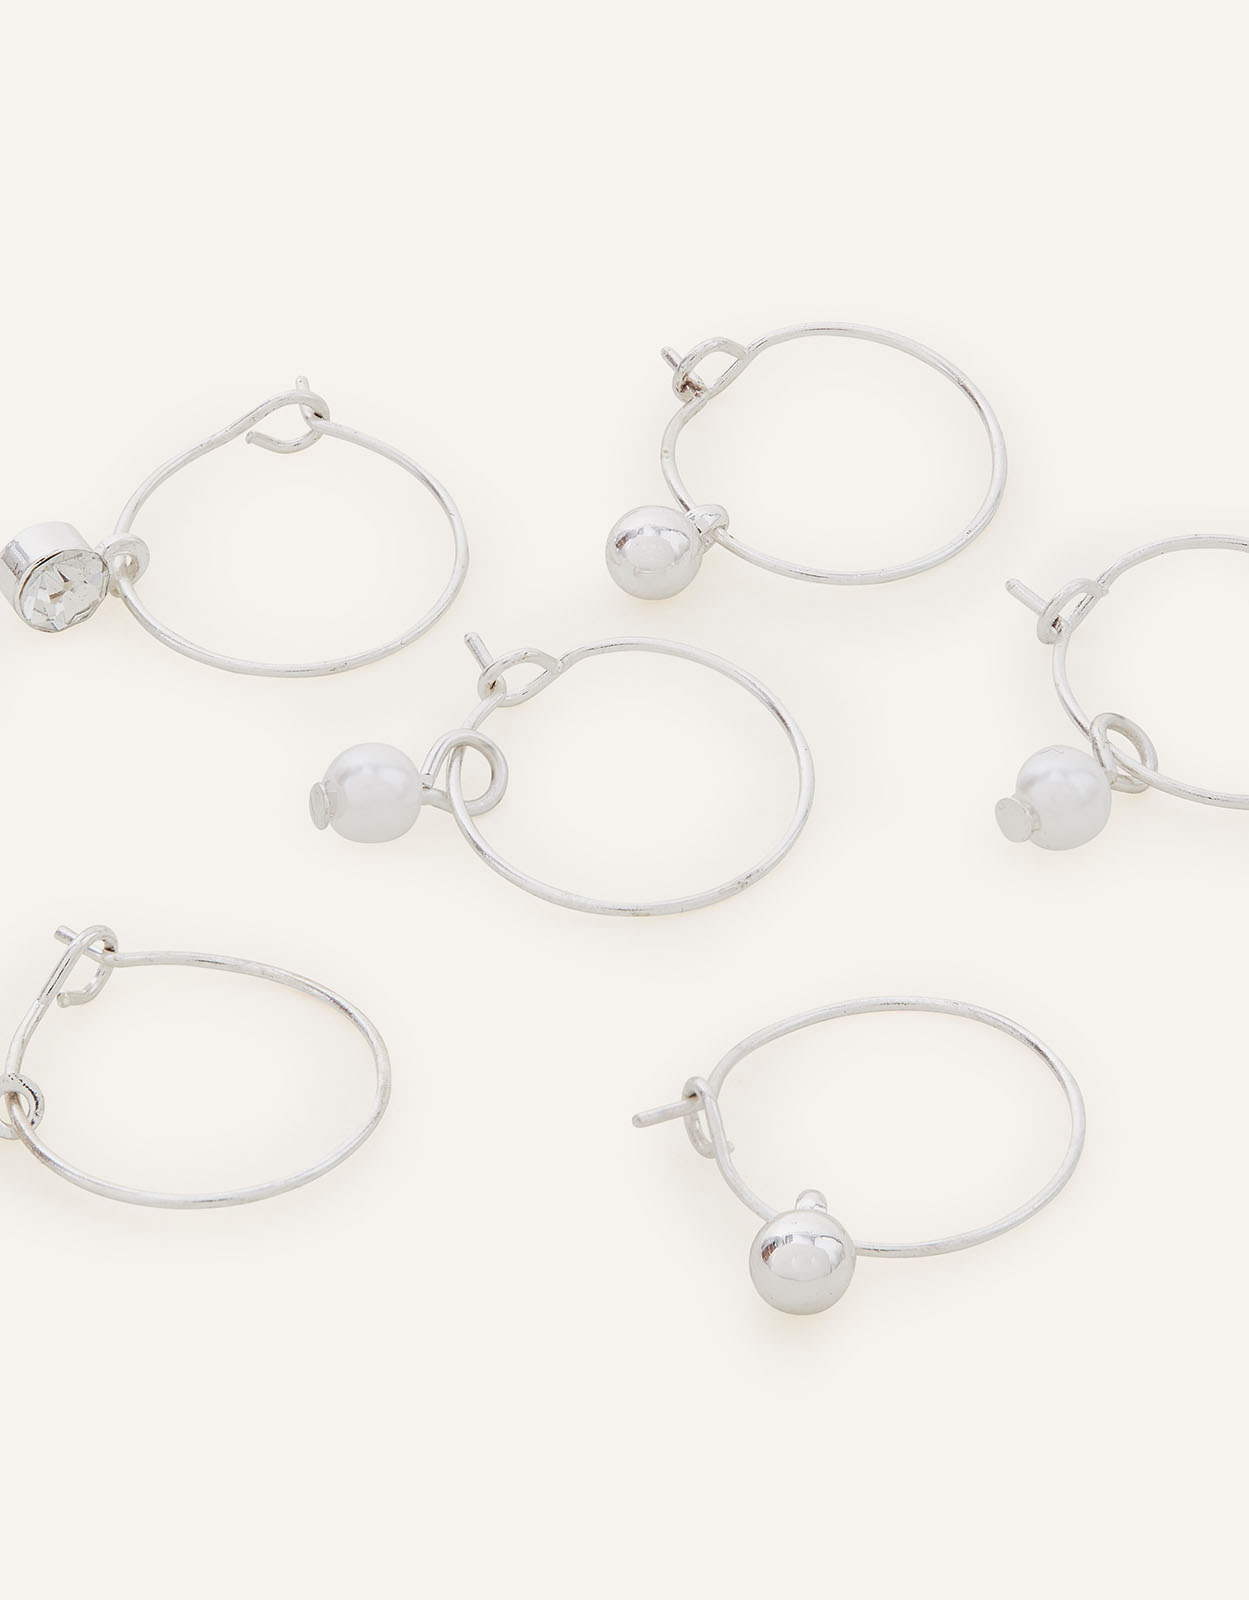 Accessorize Women's Silver Simple Charm Hoops Set of Three, Size: One Size